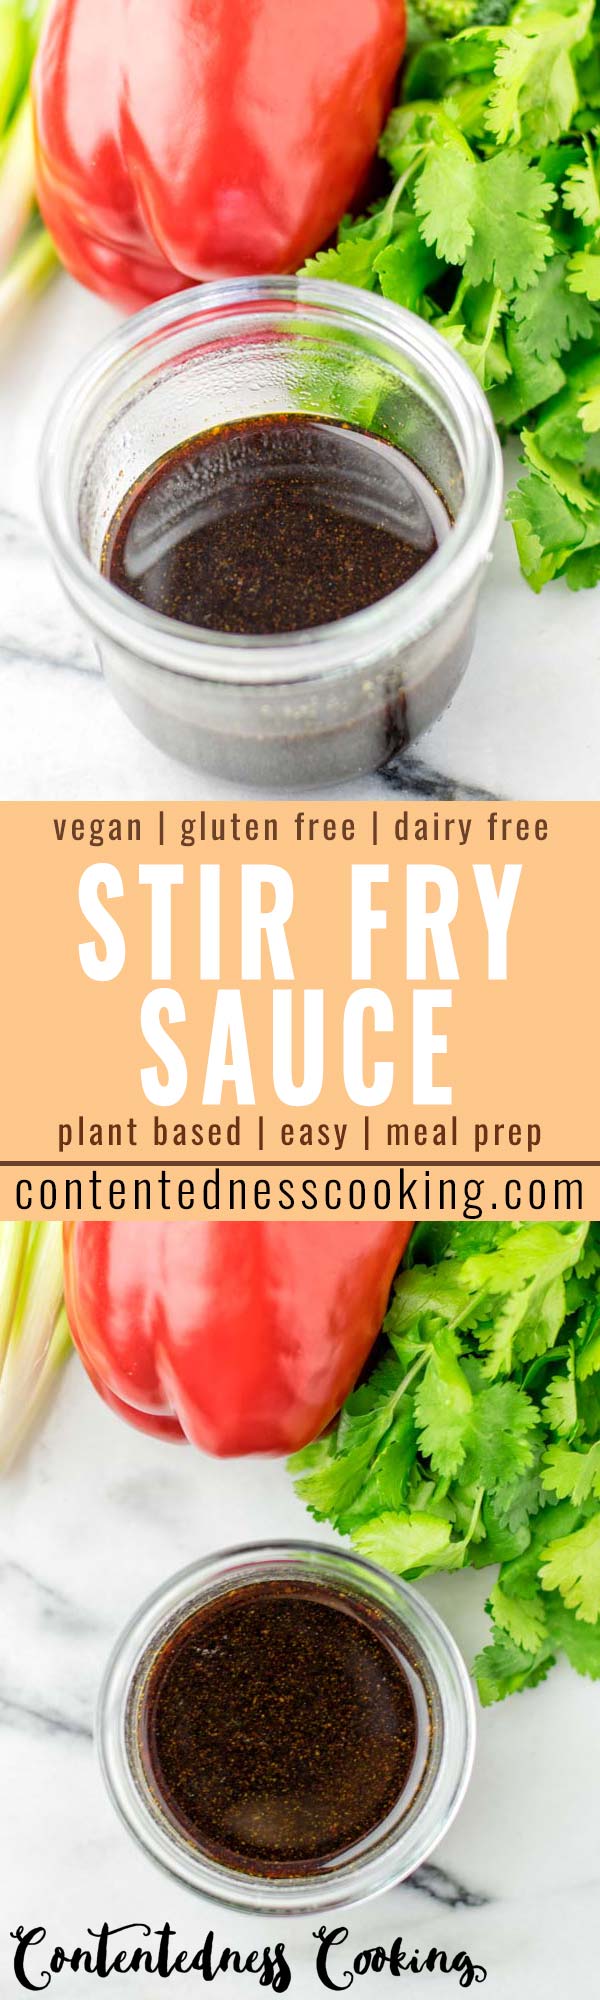 This Stir Fry sauce is homemade made with 5 simple ingredients and beats any store bought sauce in seconds. It is so delicious for stir fry vegetables, a bag frozen vegetables and so much more. A keeper to add flavor and taste to any meal. #vegan #dairyfree #vegetarian #glutenfree #stirfrysauce #contentednesscooking #dinner #lunch #mealprep #budgetmeals 